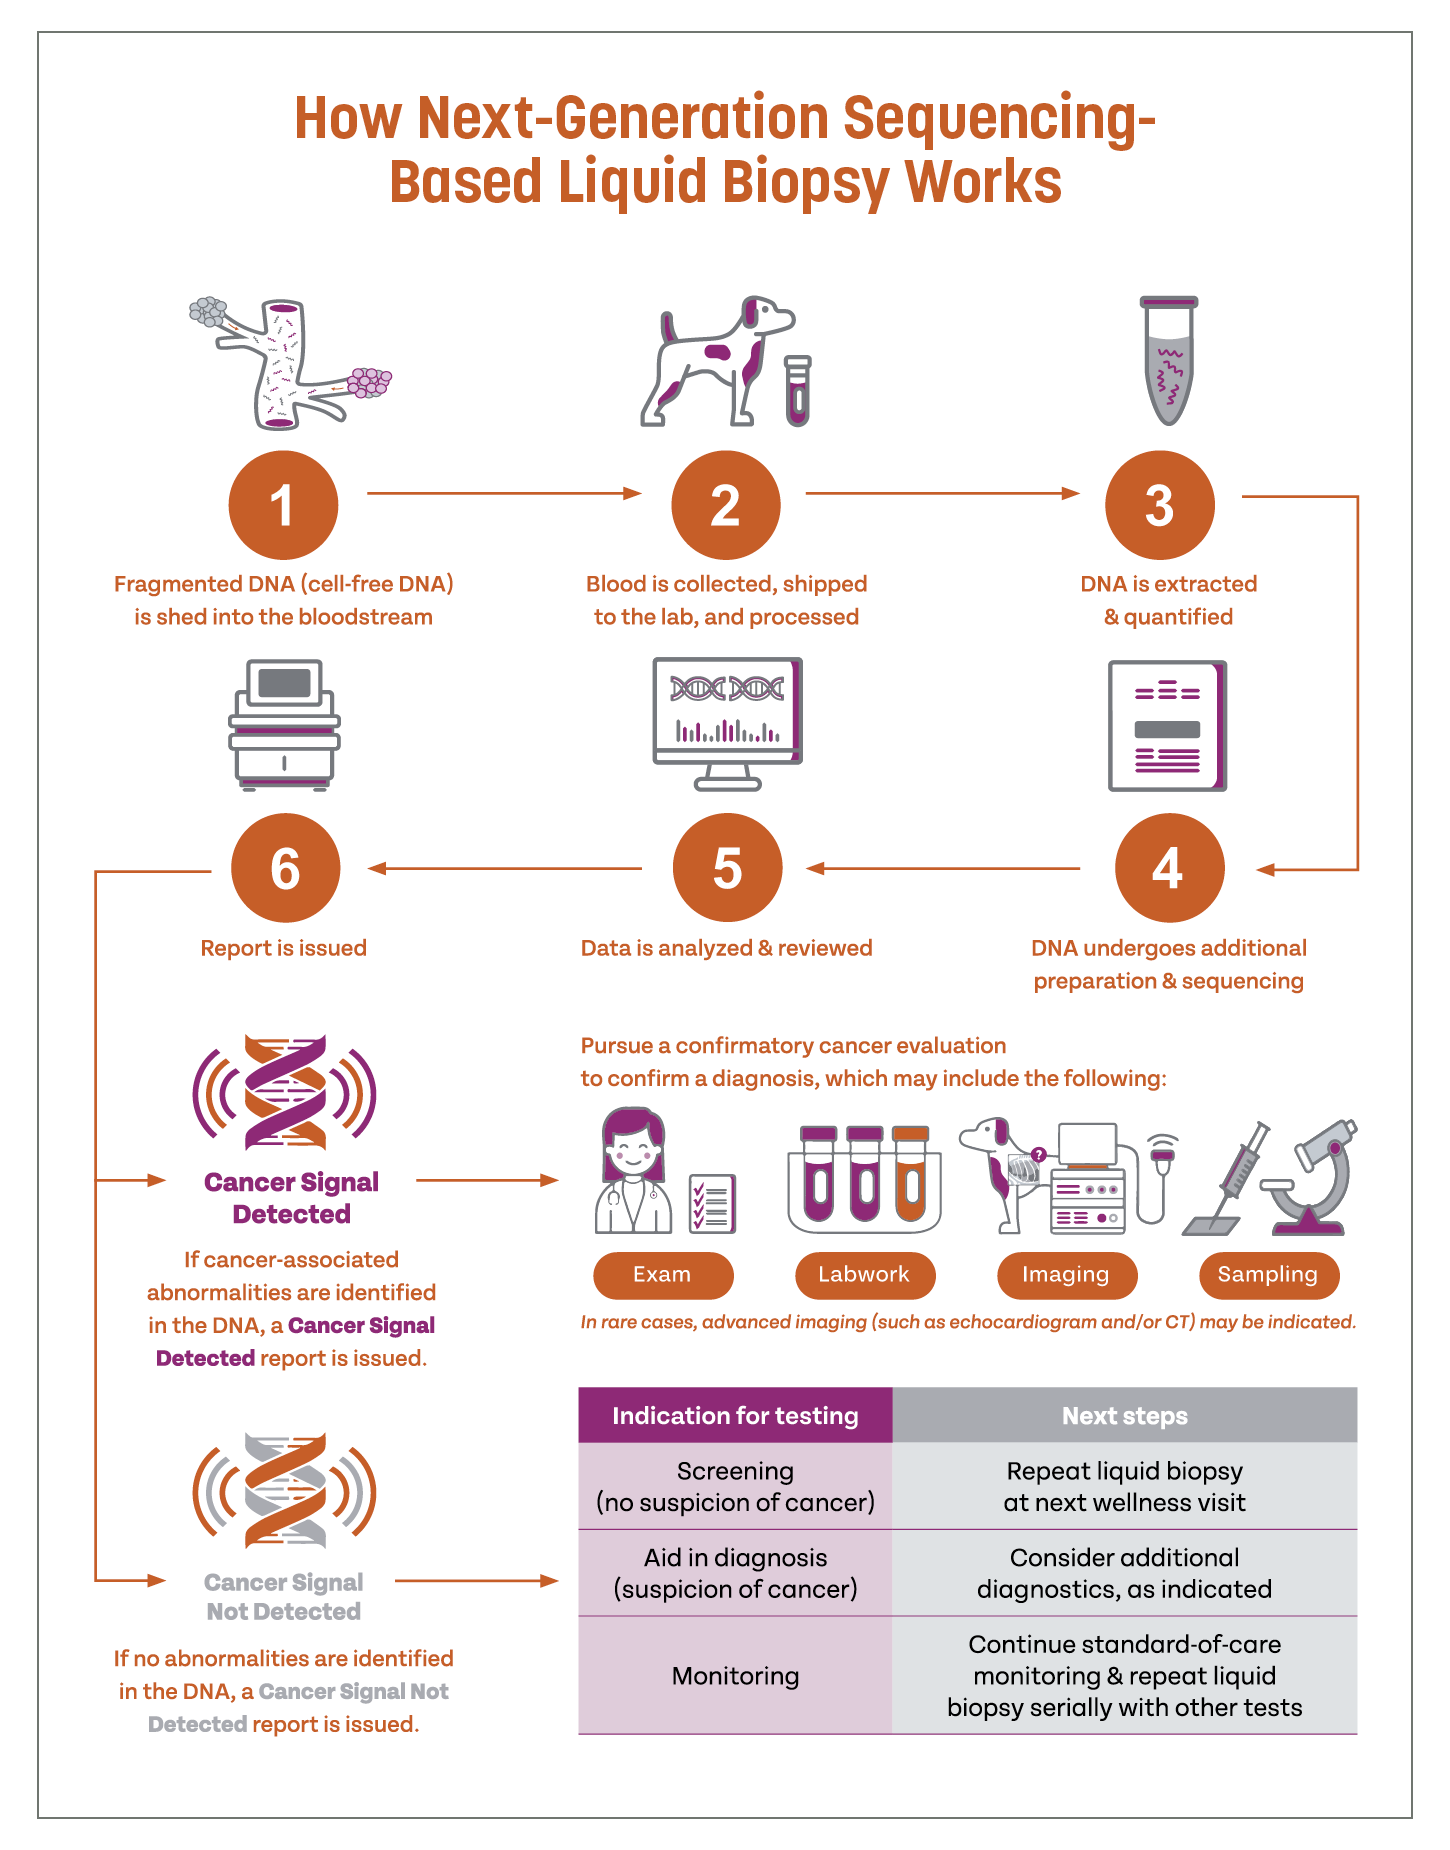 Infographic showing how liquid biopsy works